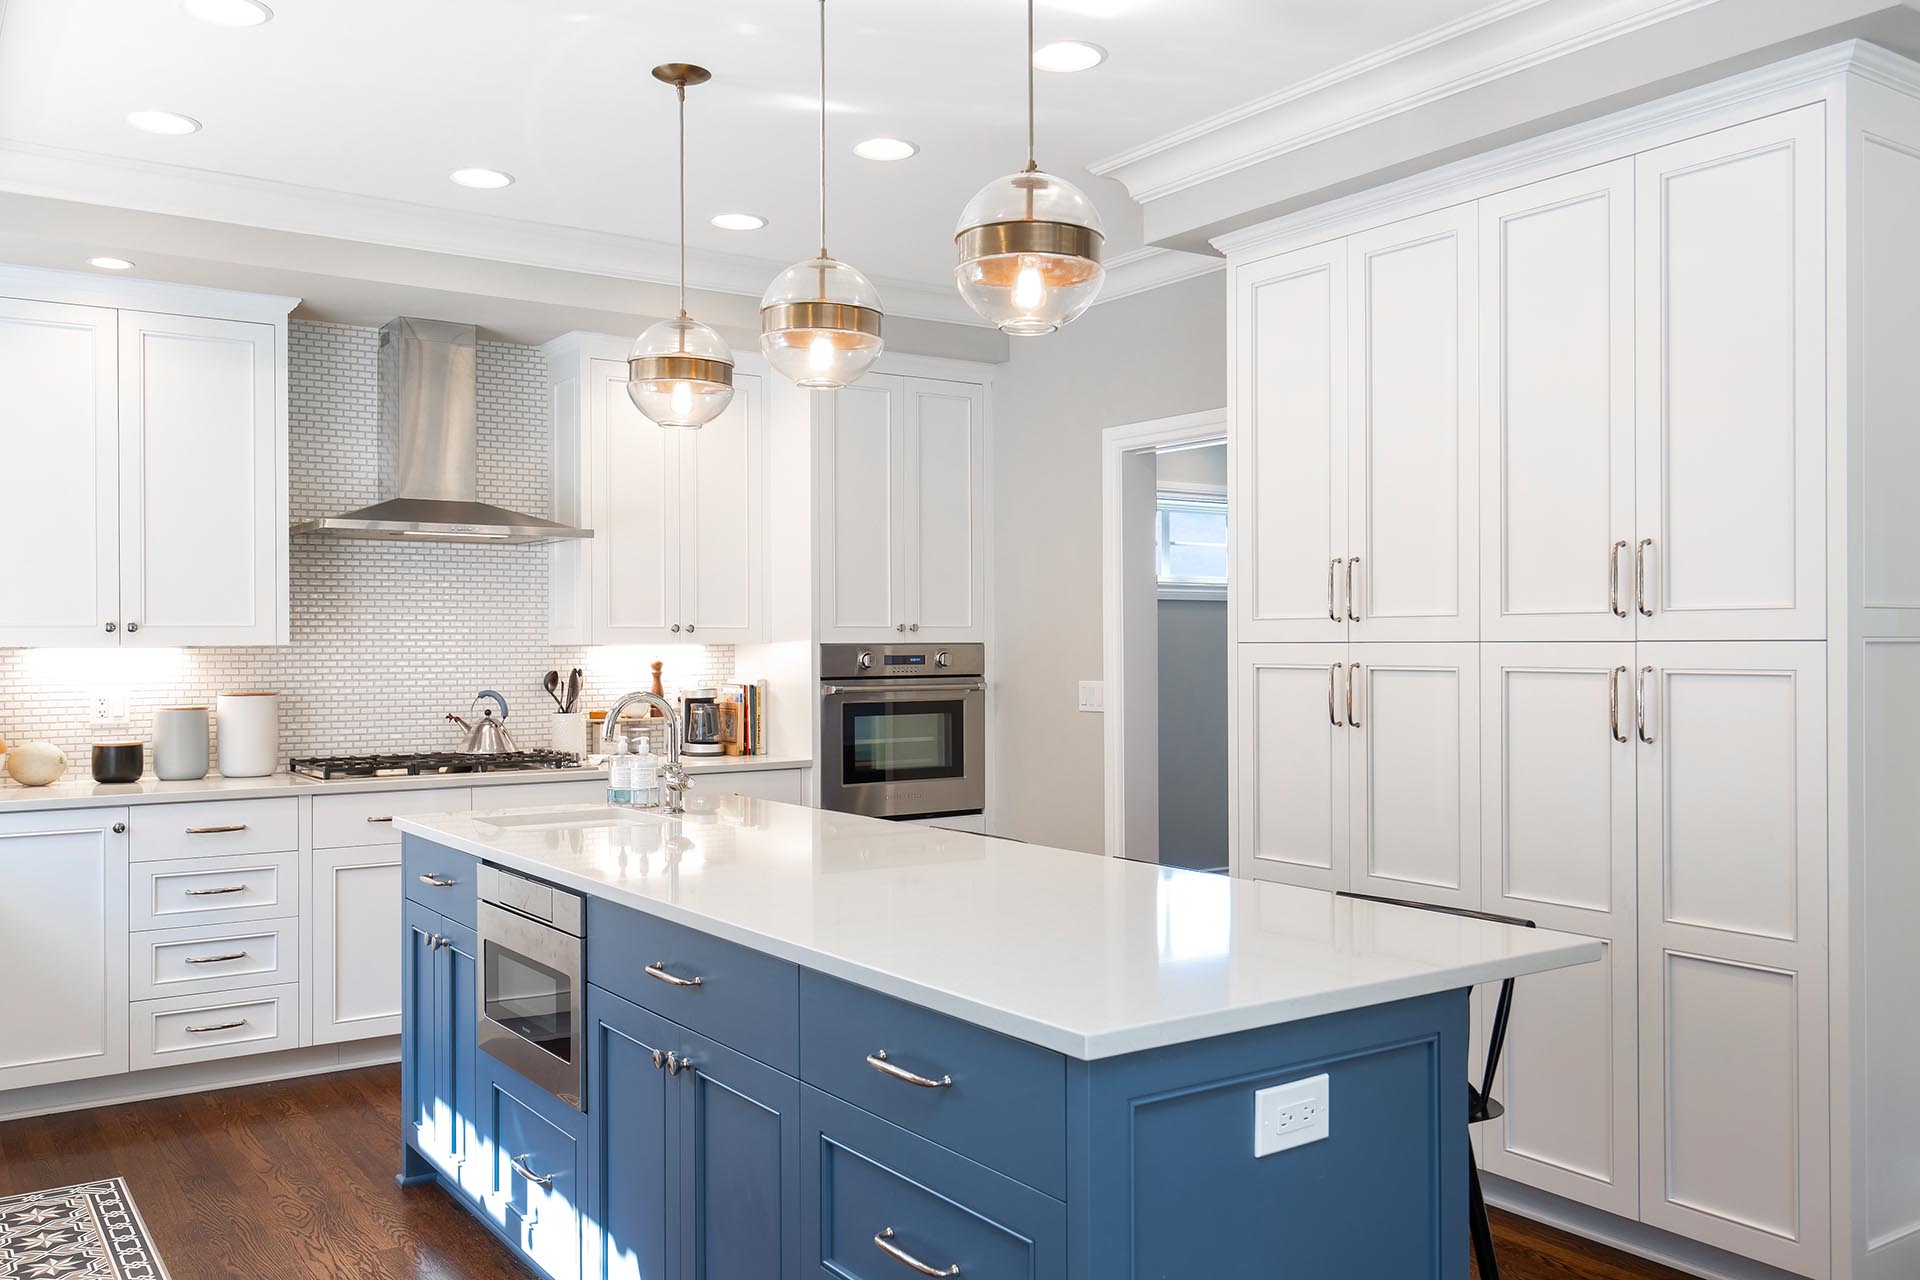 Modern kitchen remodel with white custom cabinets and blue island